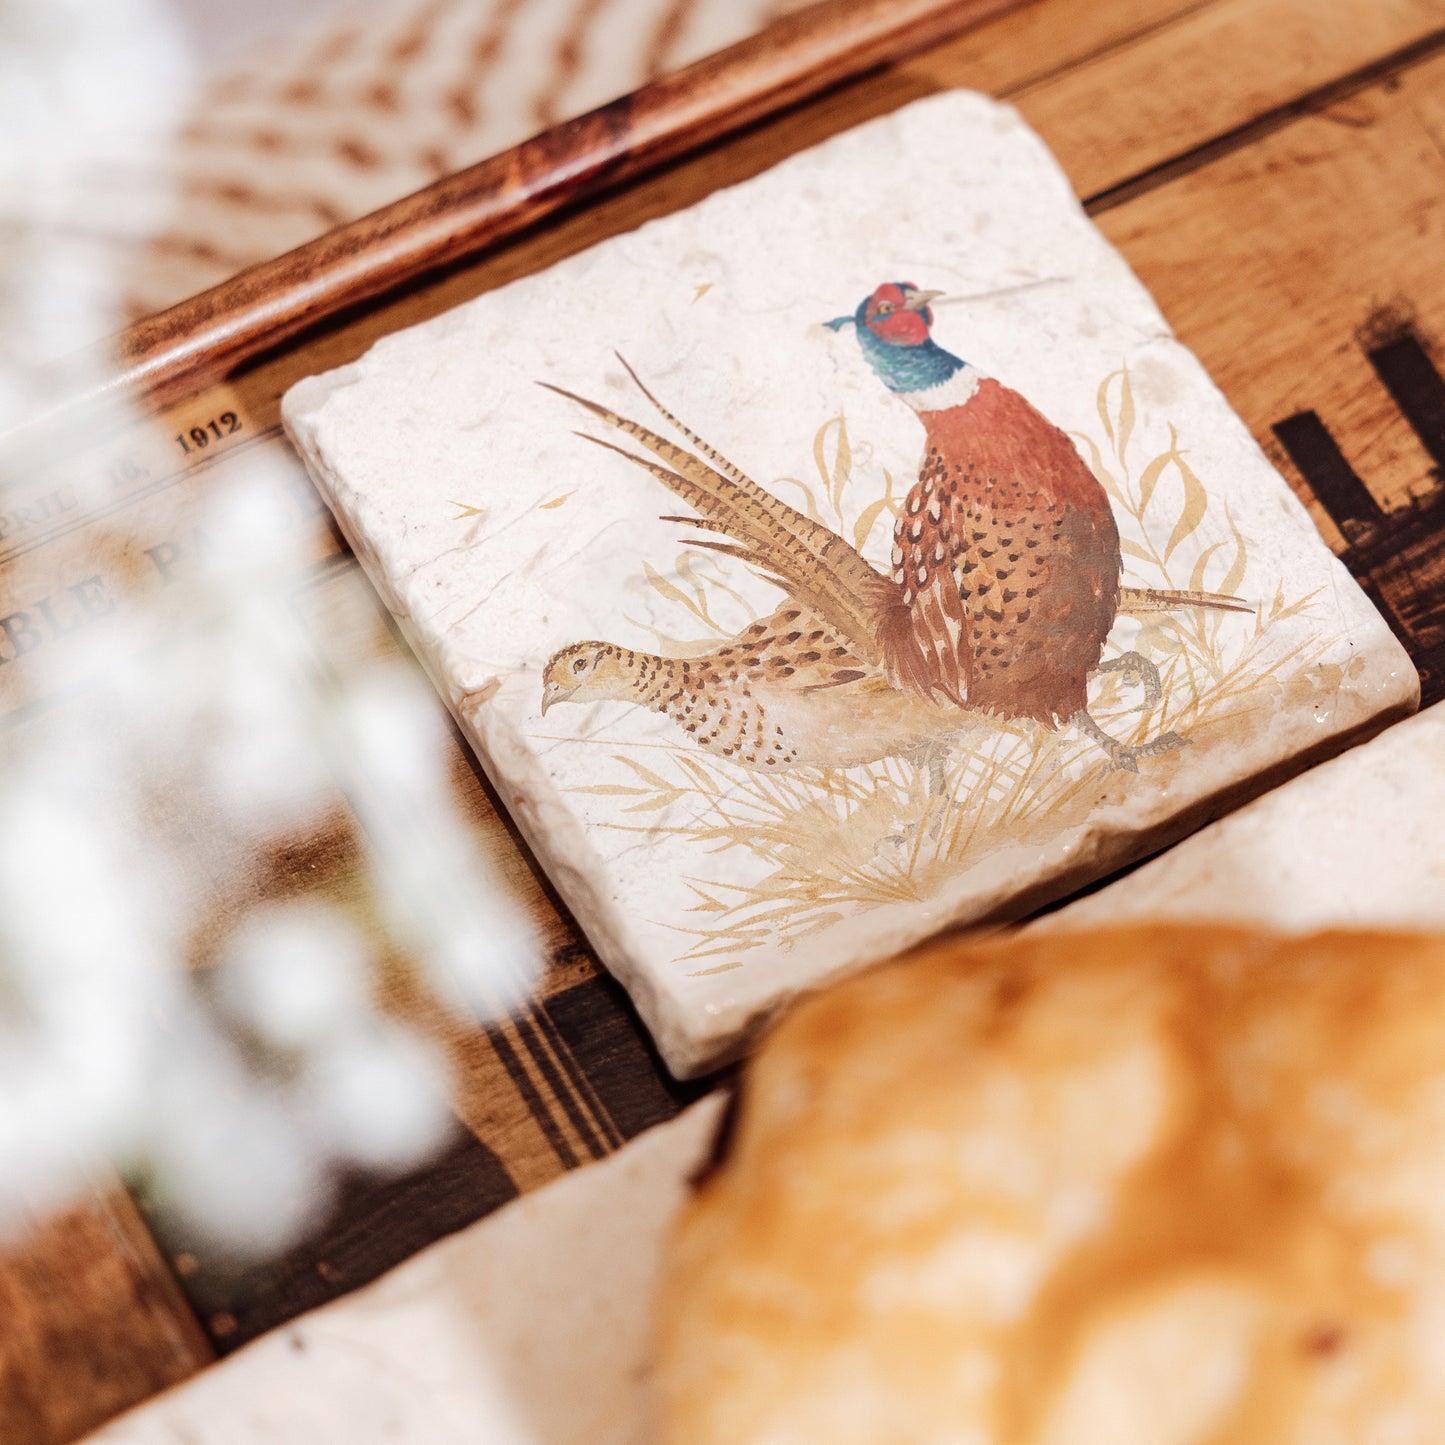 A set of 4 square marble coasters, featuring a watercolour design of a pair of pheasants, one male and one female, in golden grass.